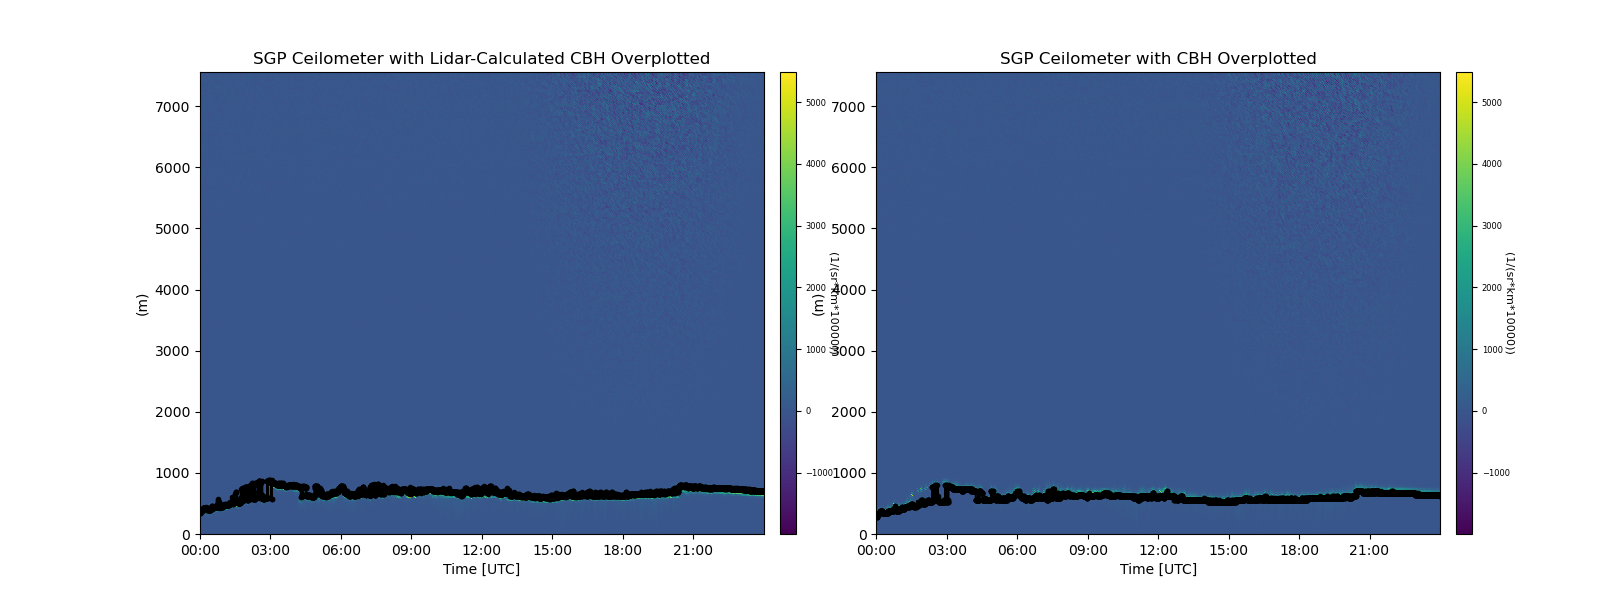 SGP Ceilometer with Lidar-Calculated CBH Overplotted, SGP Ceilometer with CBH Overplotted